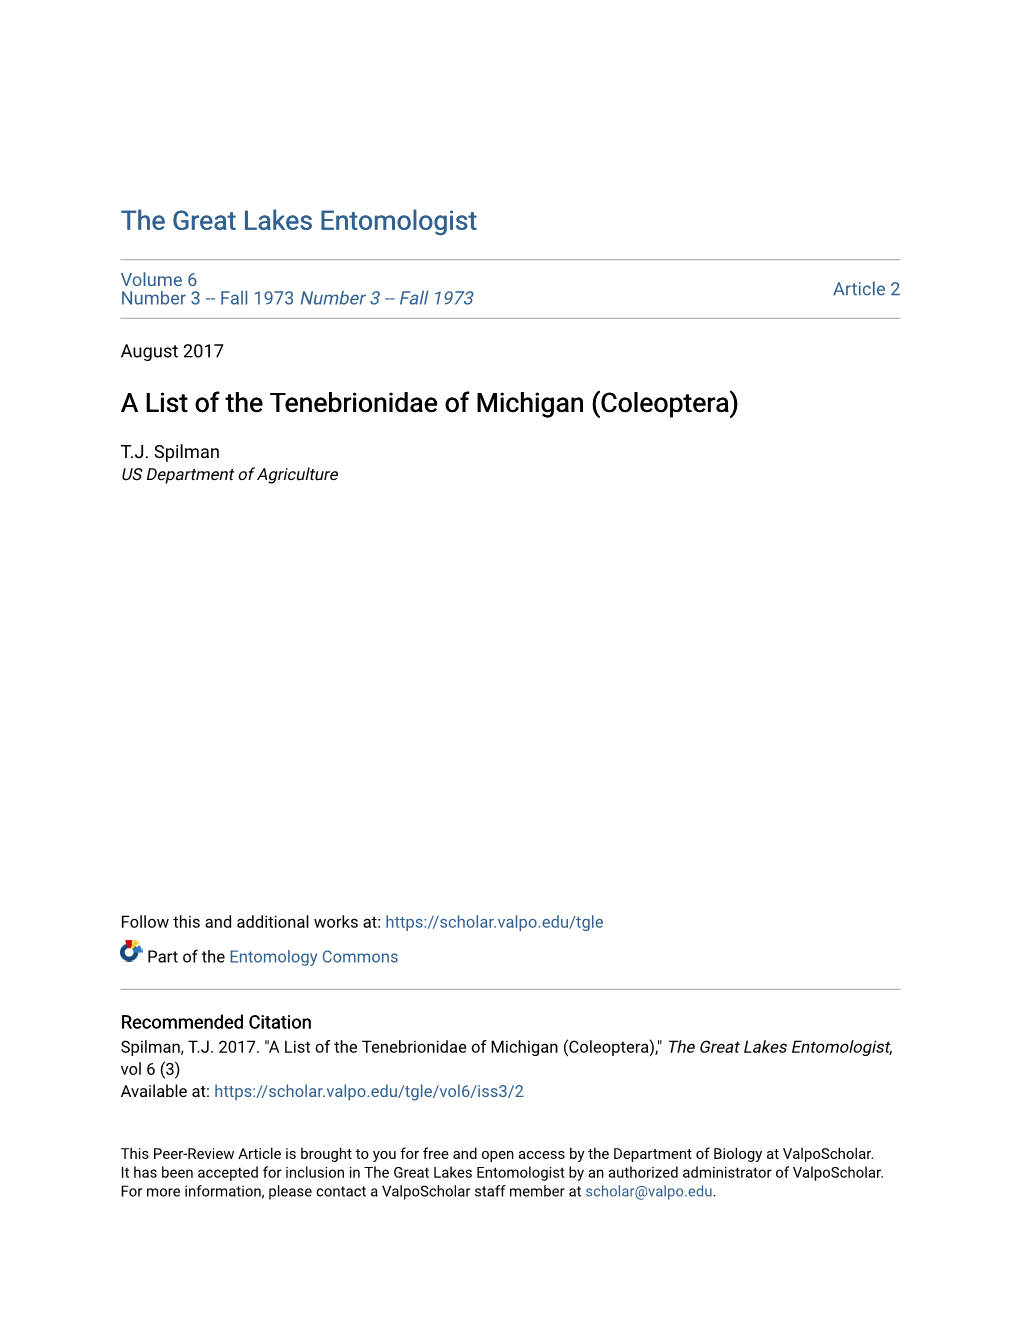 A List of the Tenebrionidae of Michigan (Coleoptera)